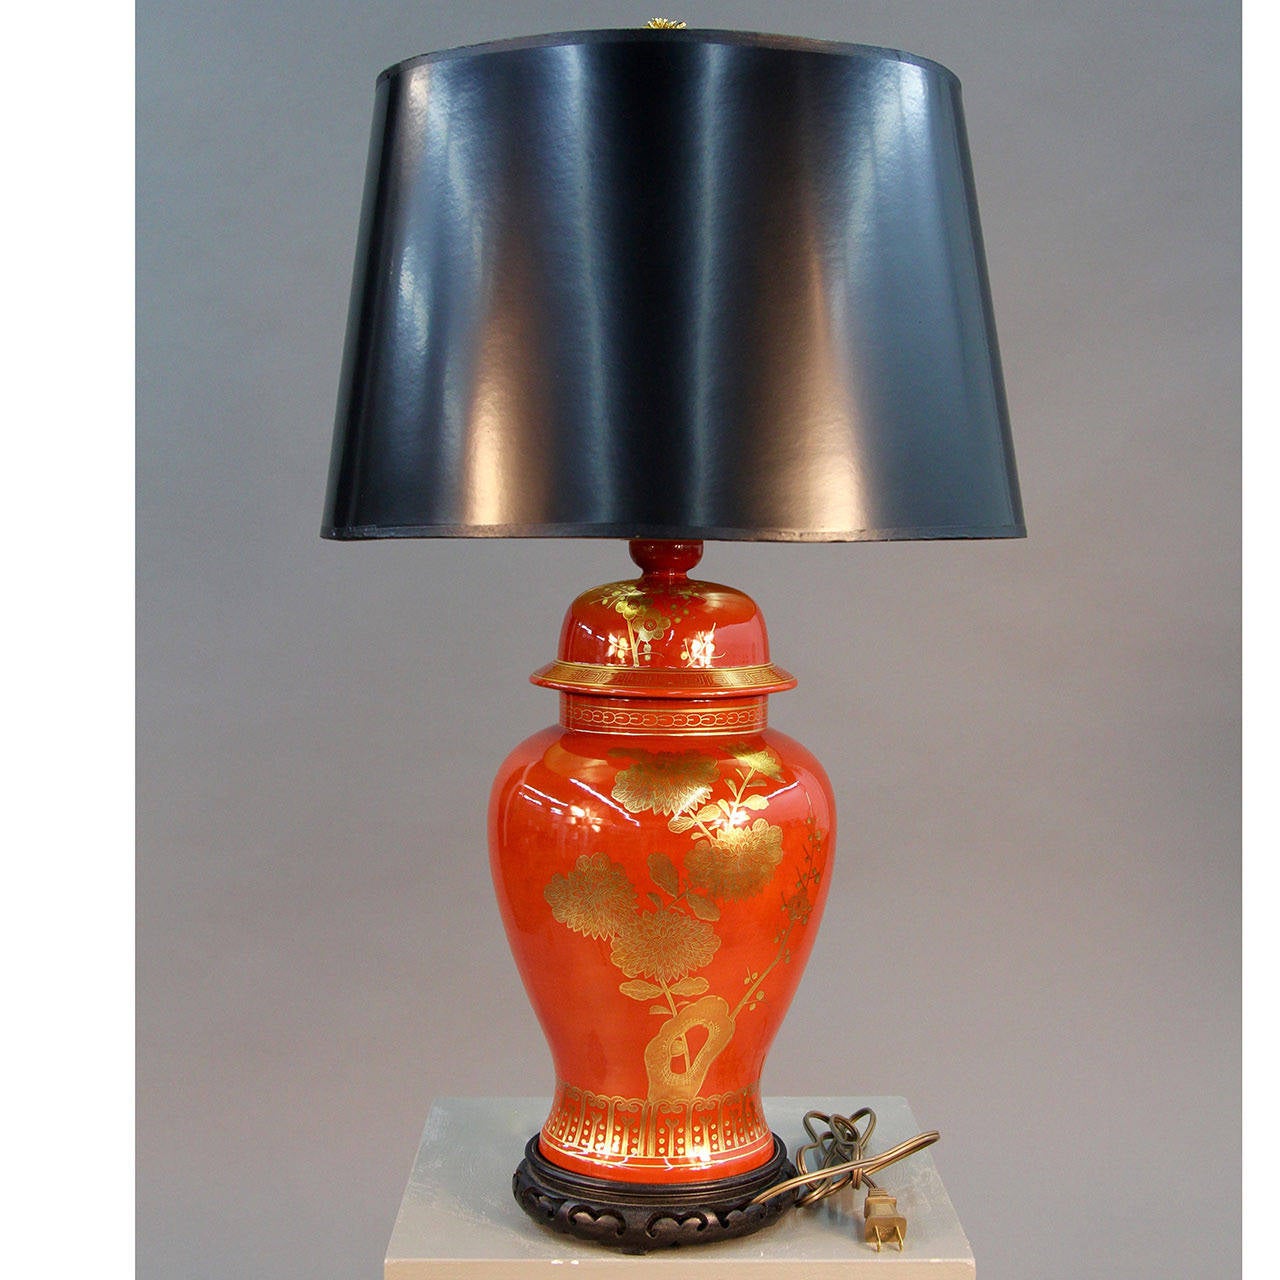 Beautiful vintage porcelain burnt orange ginger jar table lamp with hand-painted gold birds and cherry blossoms. New 17” black drum shade with a gold lining. Rewired.